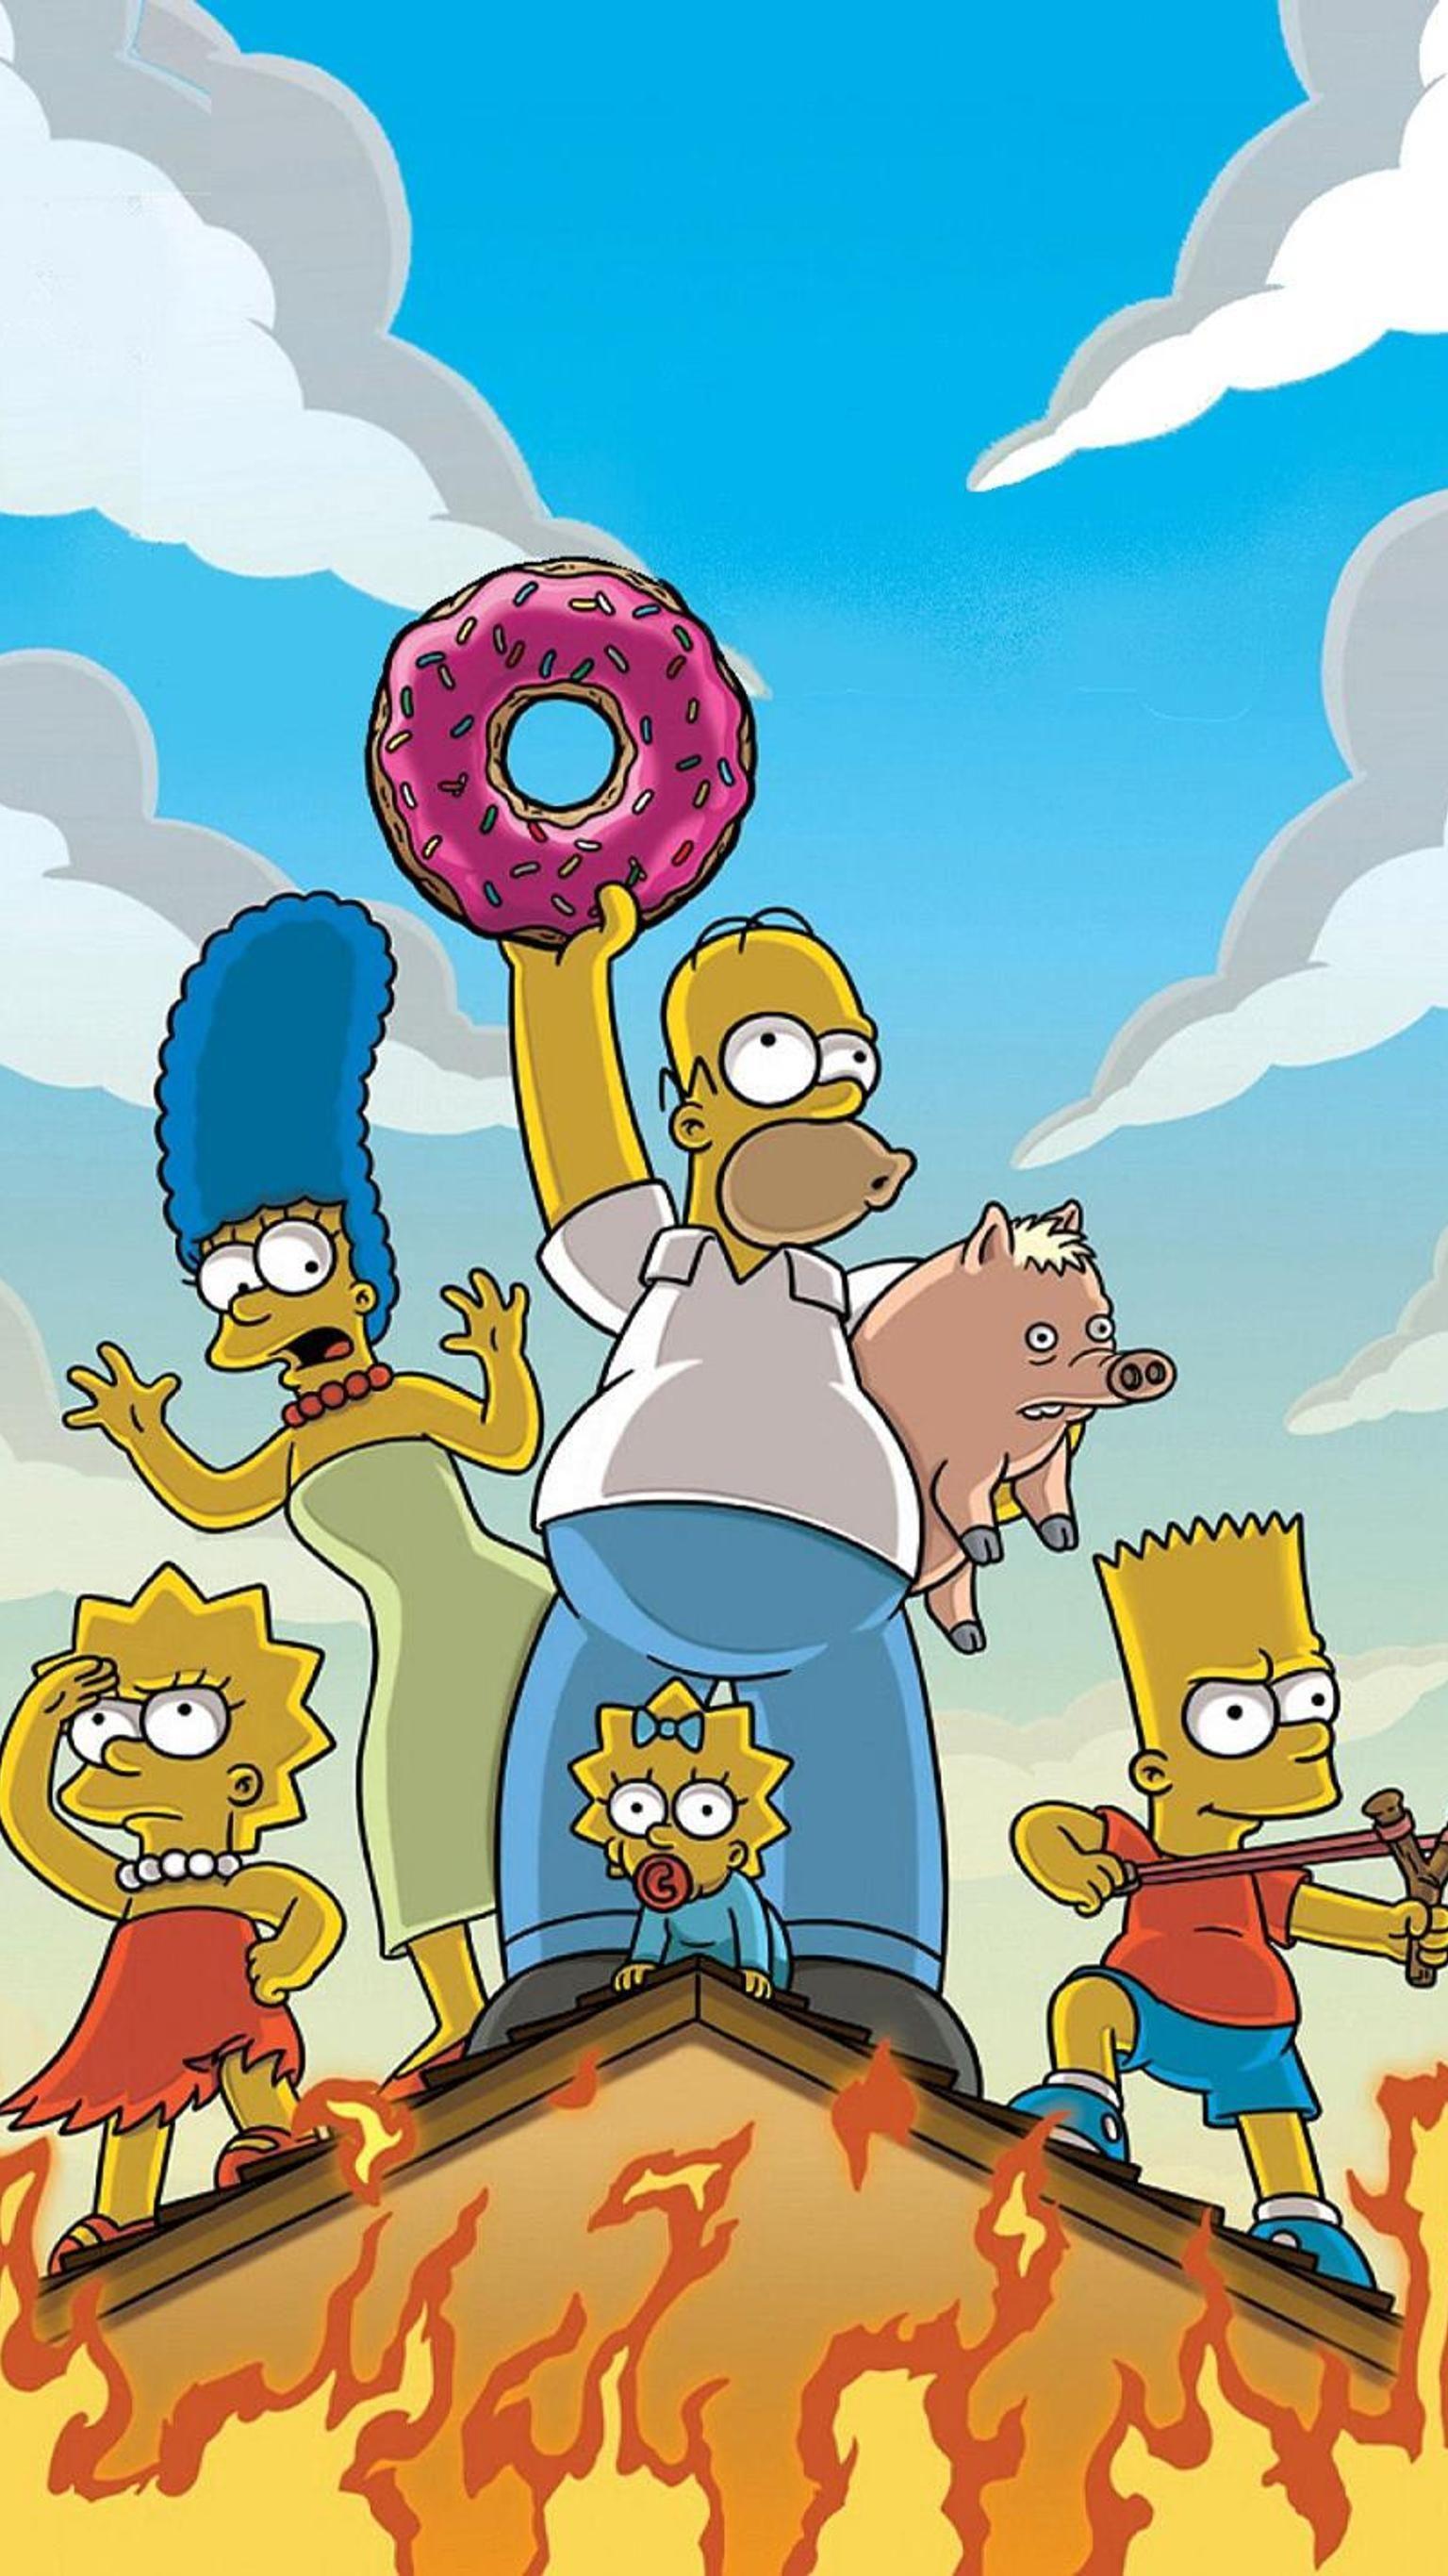 Wallpaper ID 383138  TV Show The Simpsons Phone Wallpaper Bart Simpson  Maggie Simpson Homer Simpson 1080x1920 free download